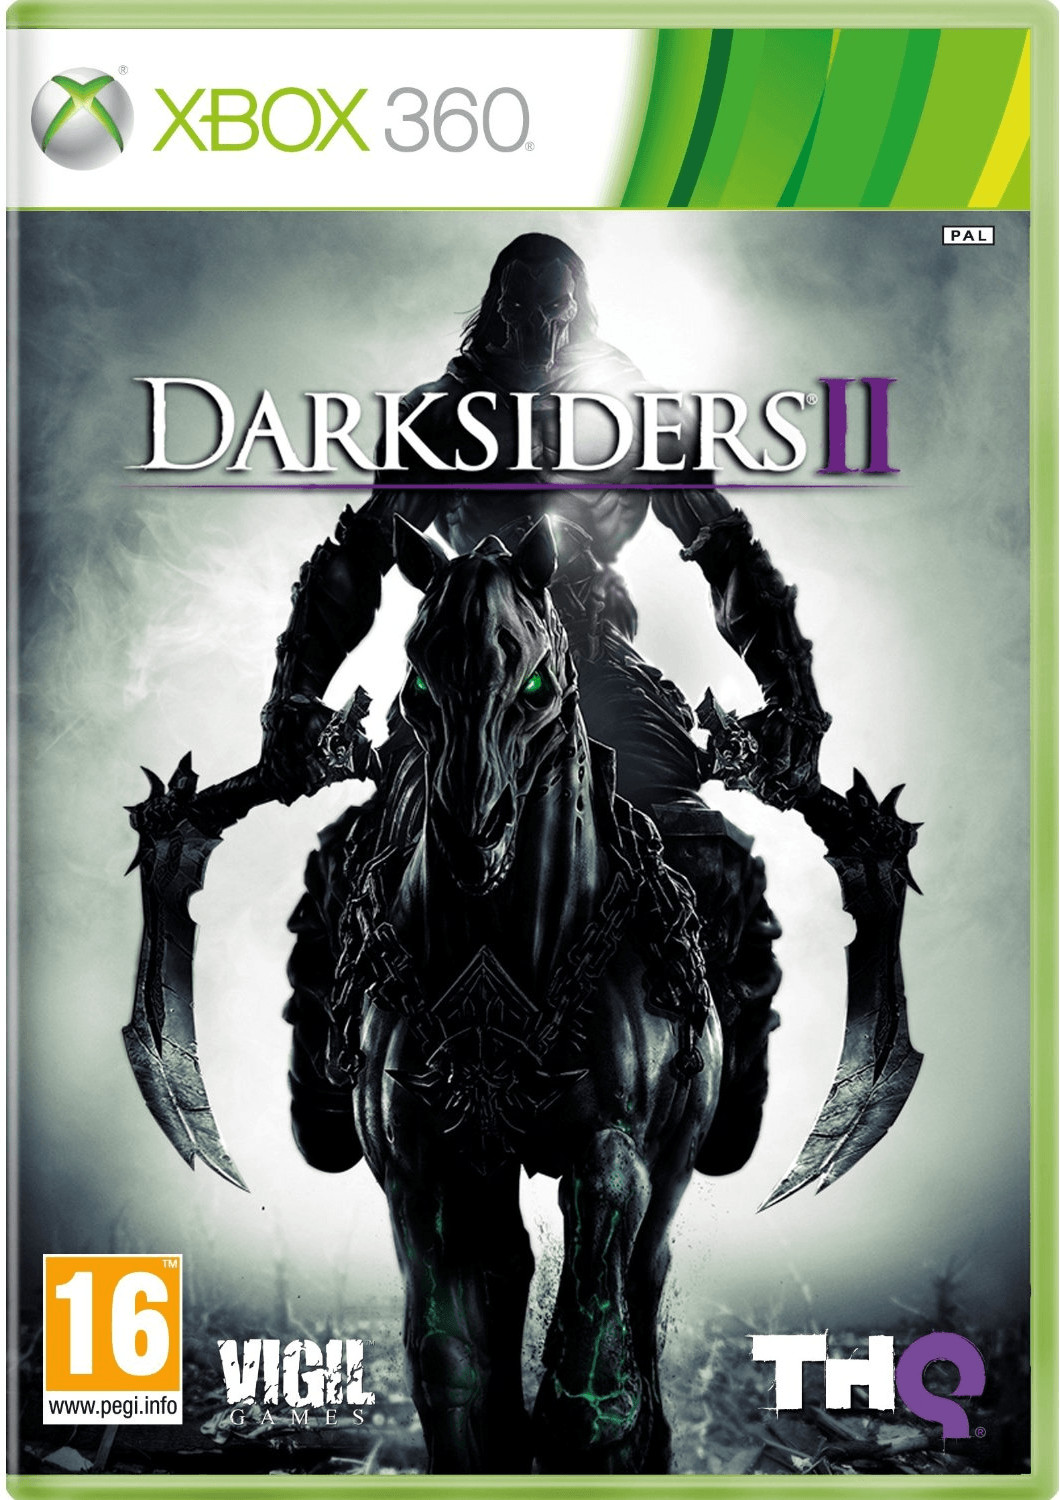 buy-darksiders-2-xbox-360-from-8-79-today-best-deals-on-idealo-co-uk